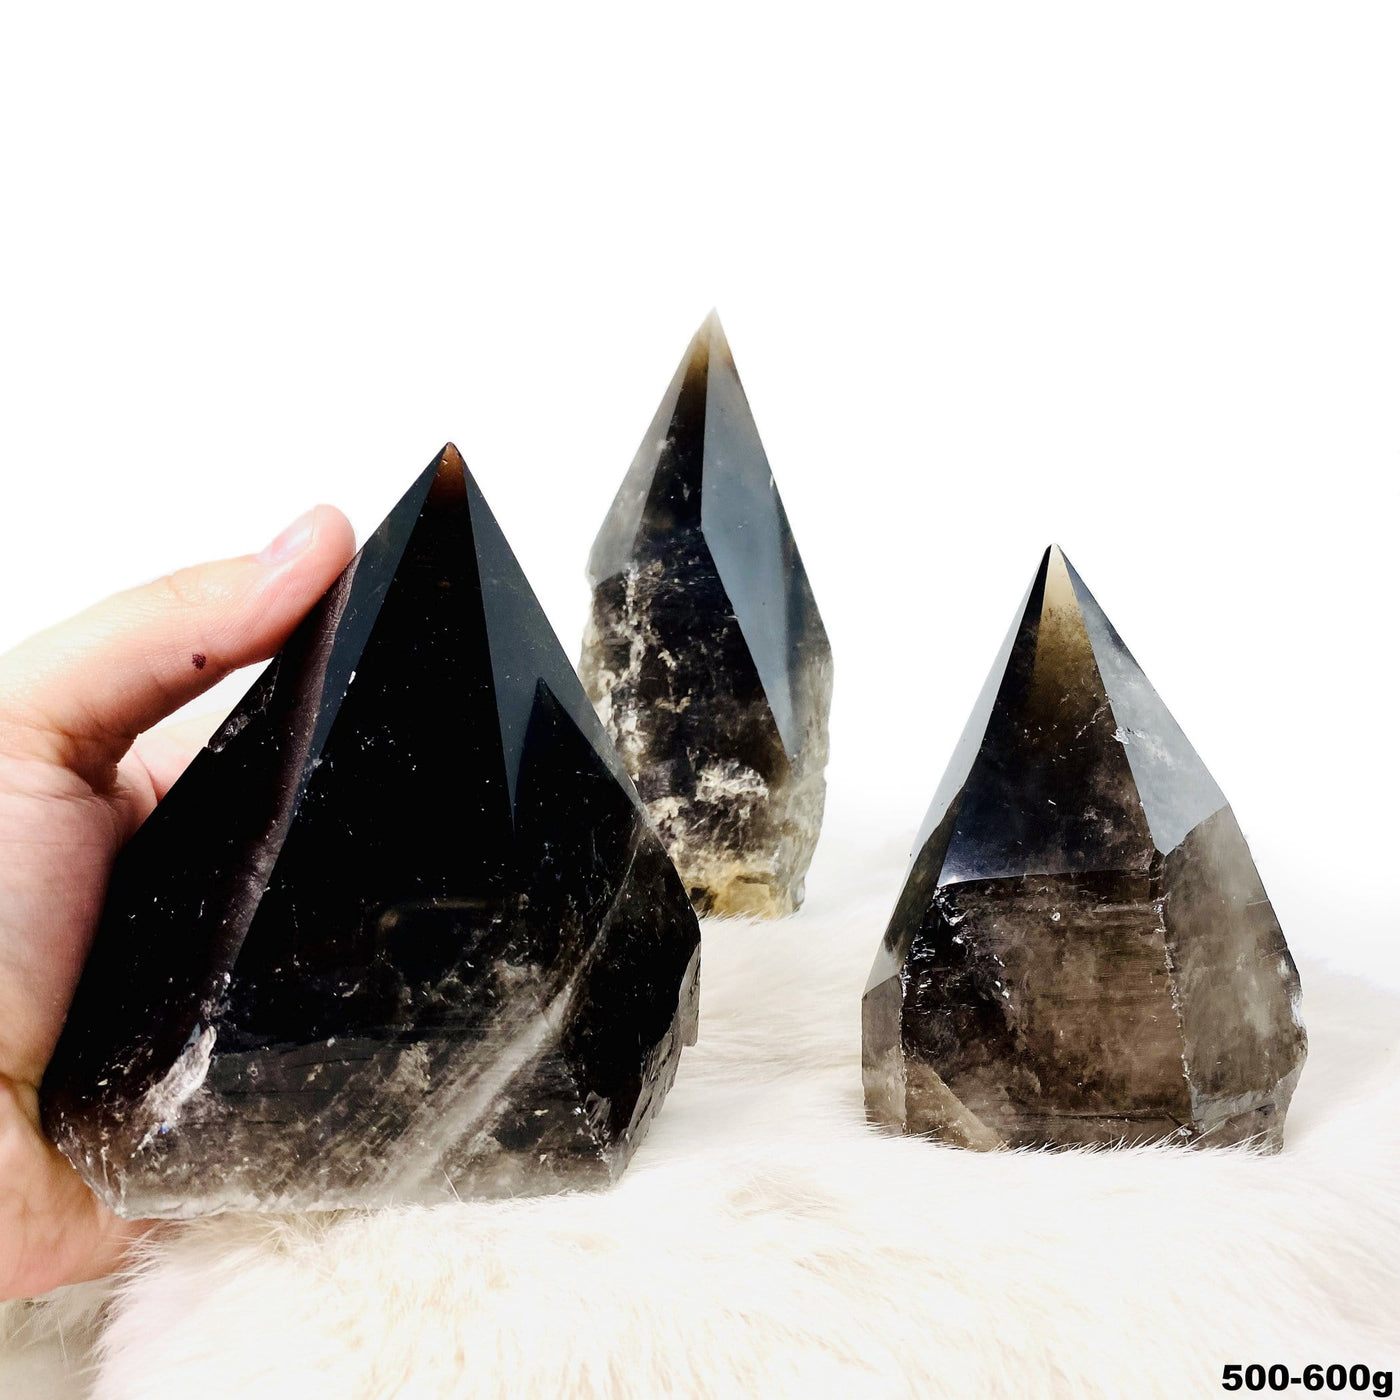 three 500g - 600g smokey quartz semi polished points on display for possible variations with one in hand for size reference